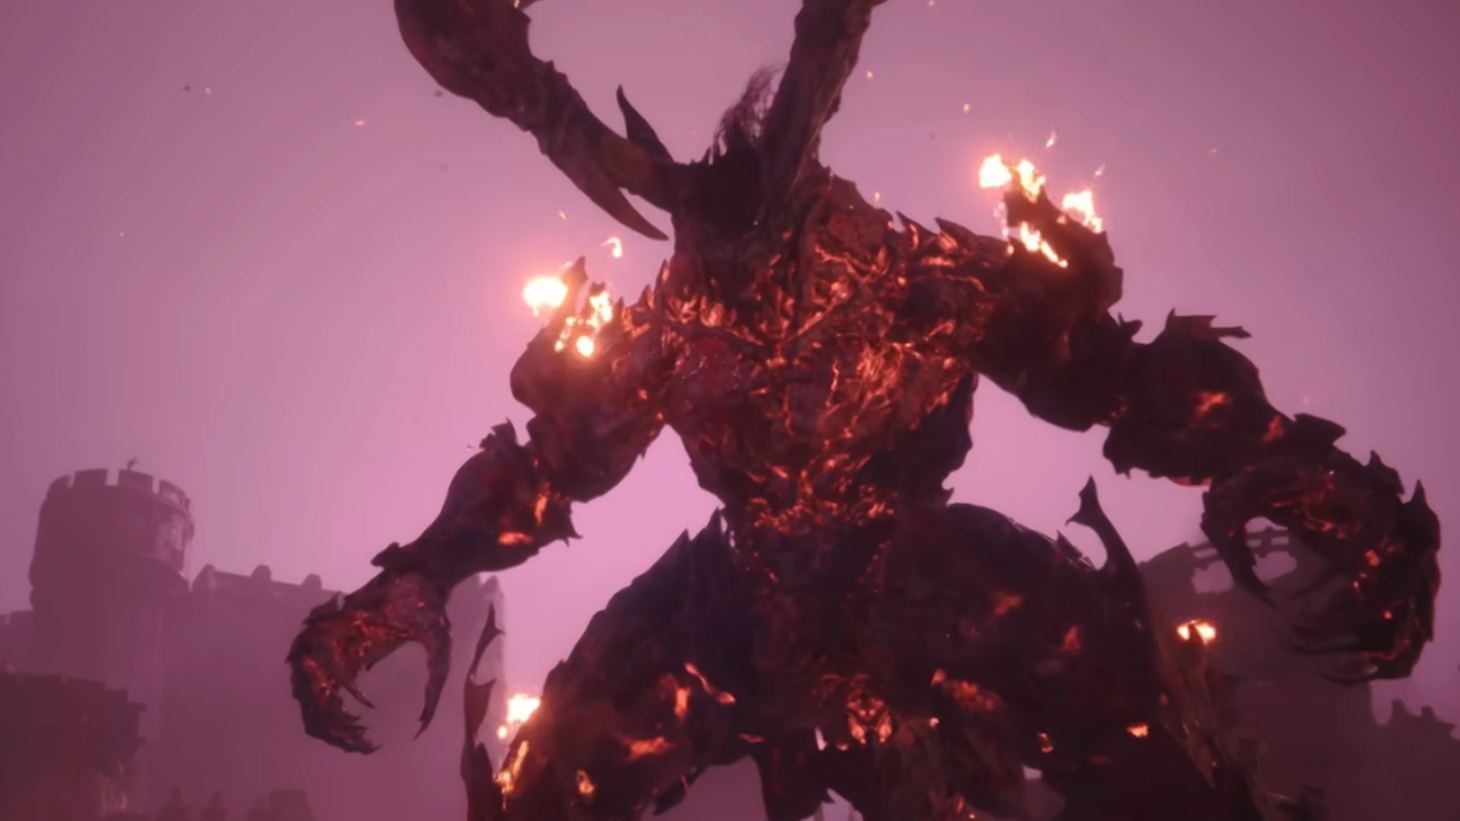 Final Fantasy 16 Eikons: Ifrit can be seen